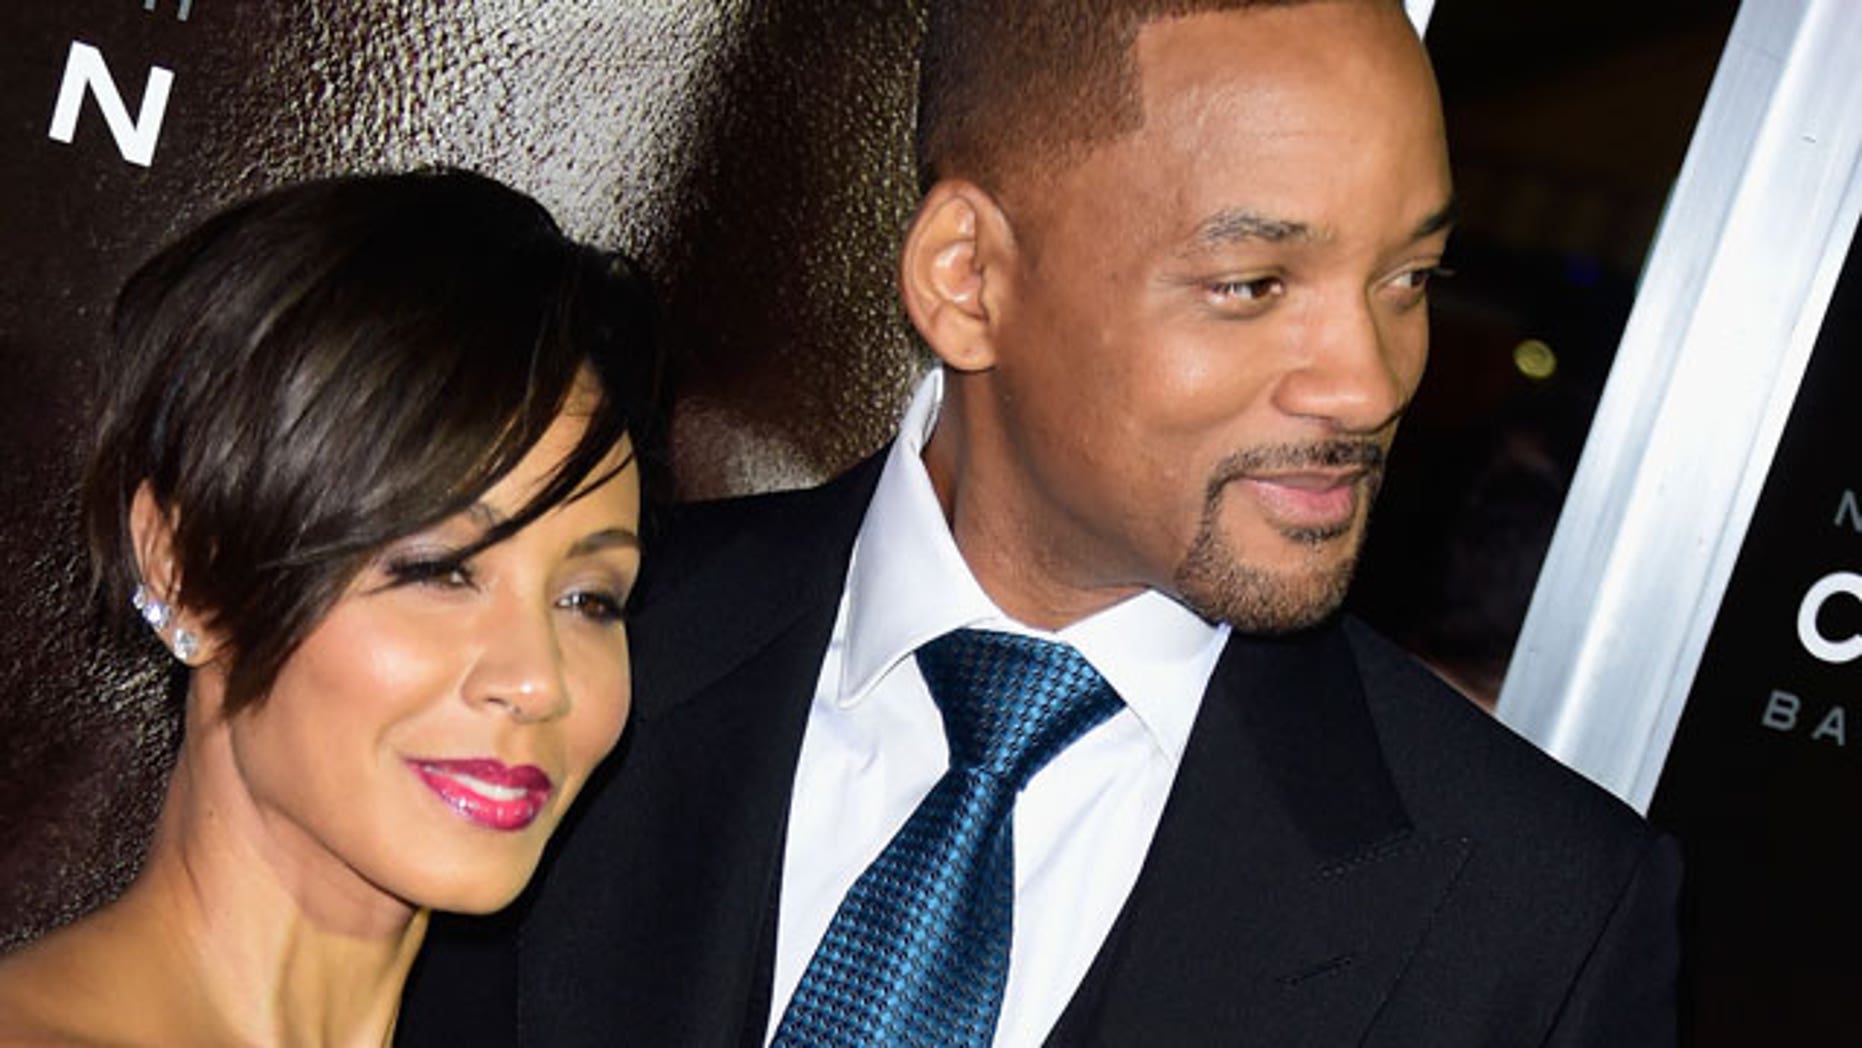 Will Smiths Wife Jada Pinkett Smith Says Her Mom Once Questioned Their 